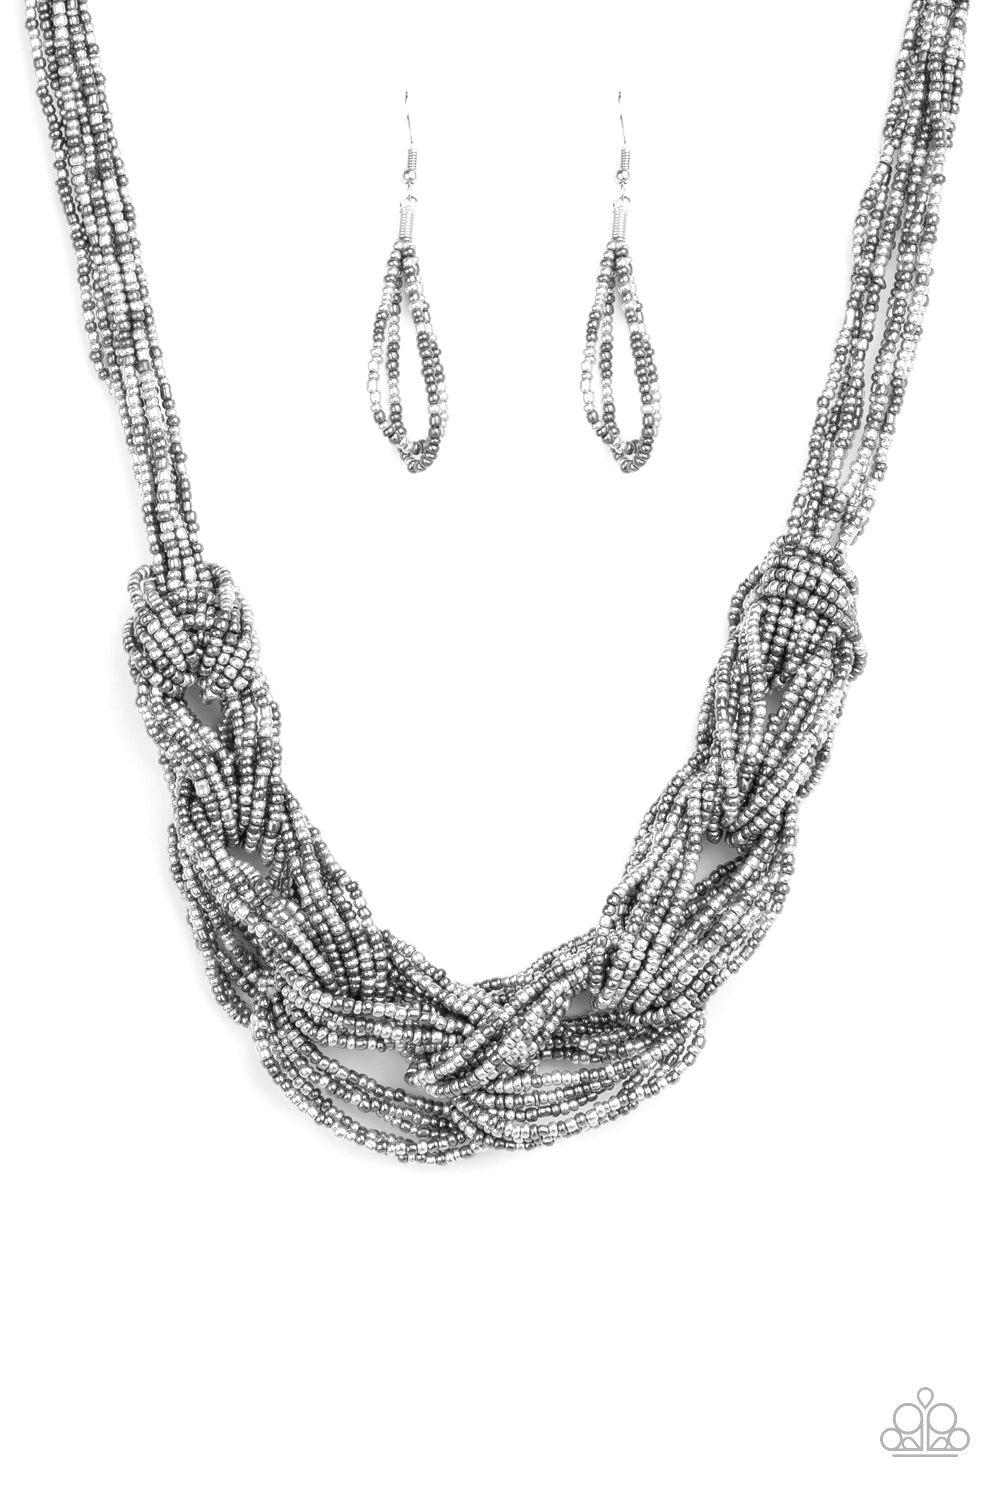 Paparazzi City Catwalk Short Silver Seed Bead Necklace